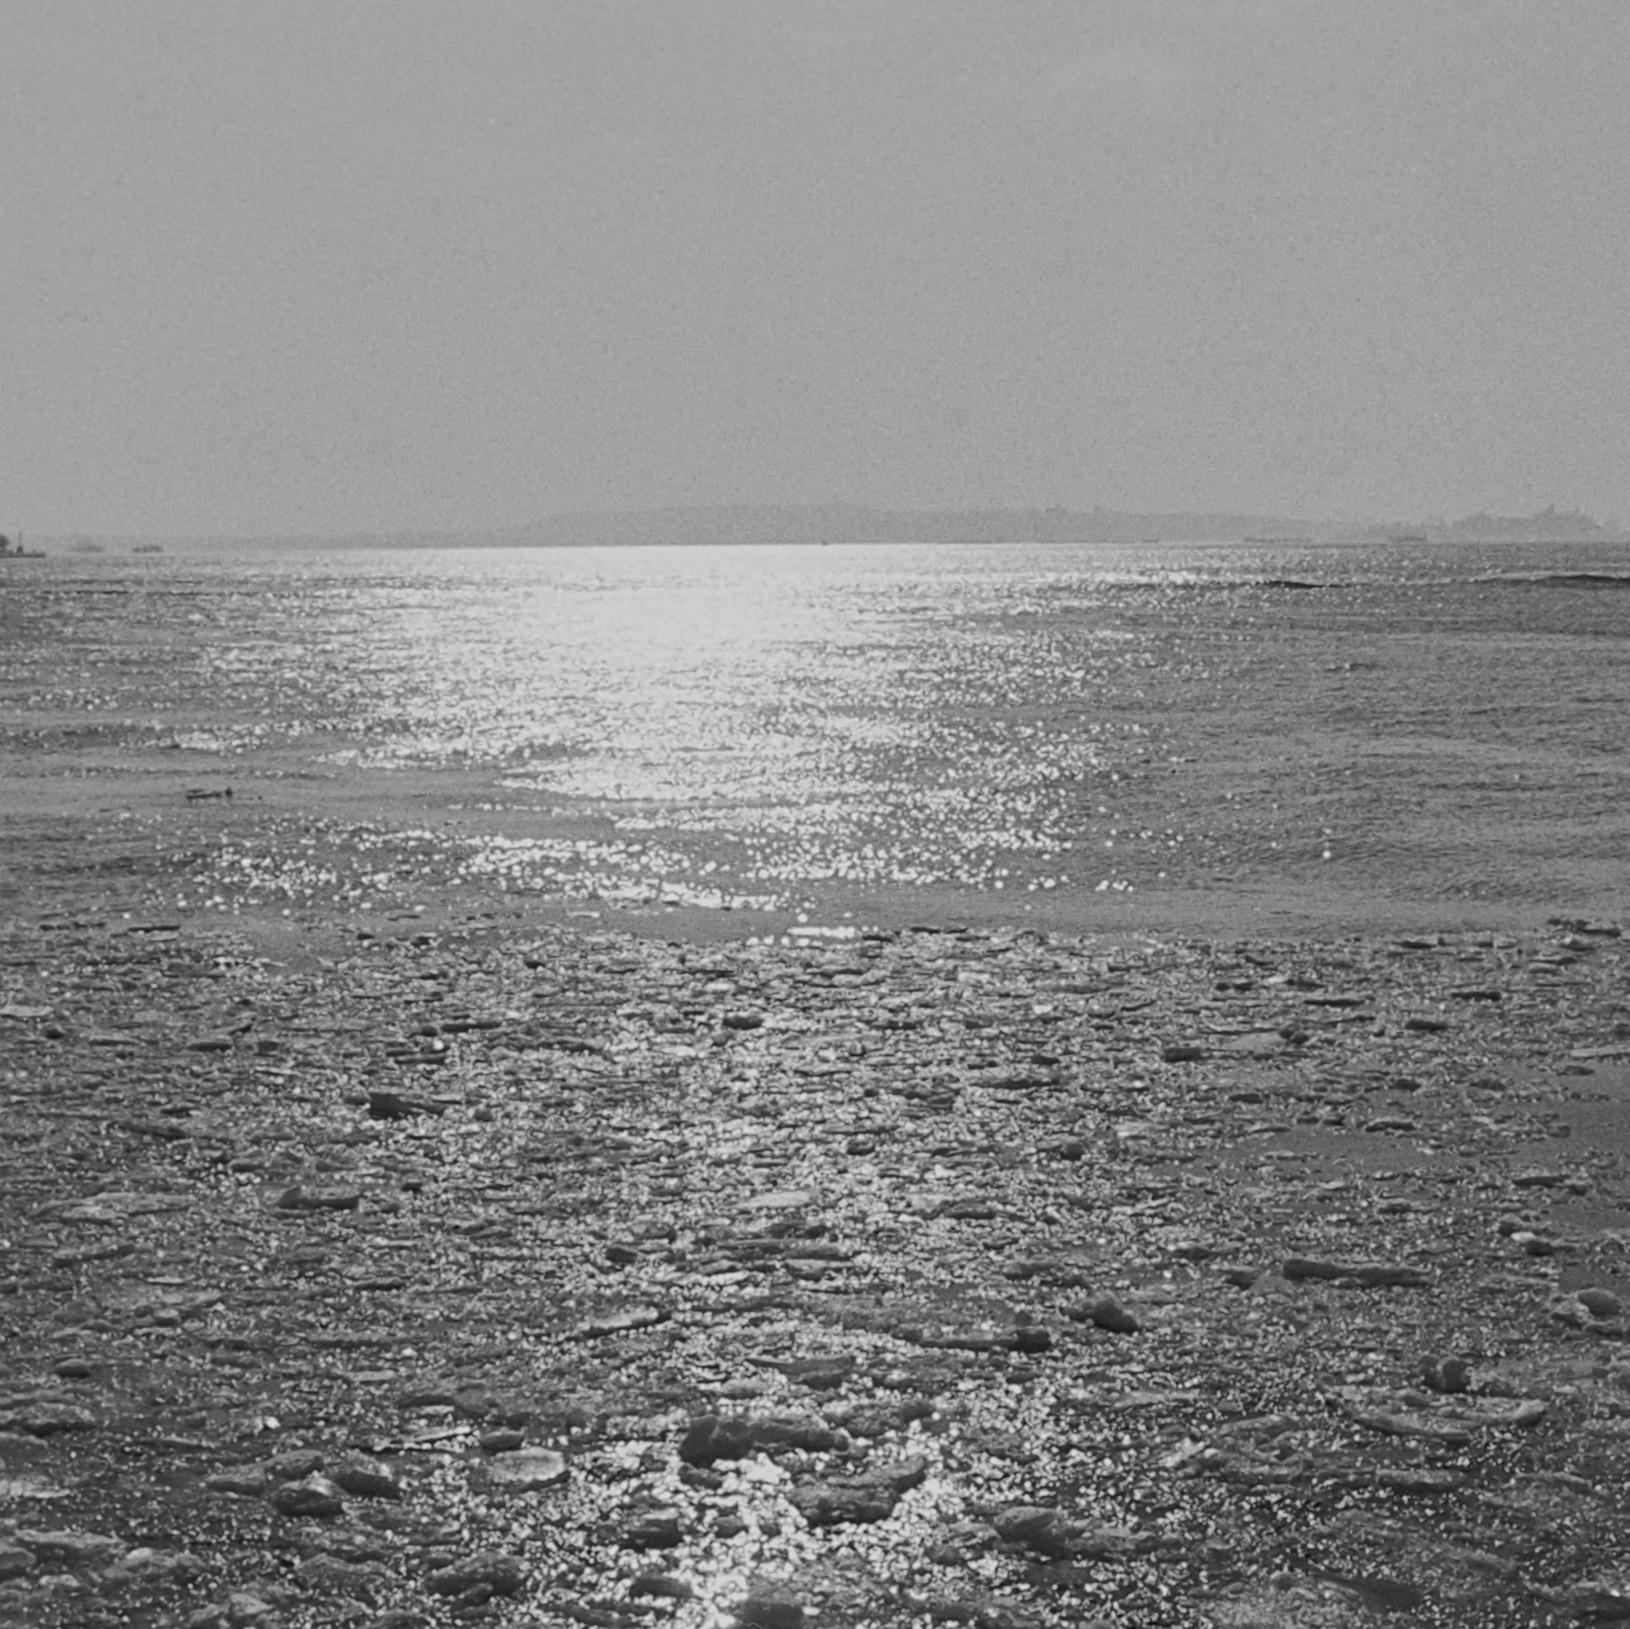 Untitled (0901-5A), Original Black and White Photograph, 2012
Black & white photograph. The composition frames the sunlight reflecting onto the water between two high contrast black columns. 

Artist Commentary:
In this stunning, classic photograph,